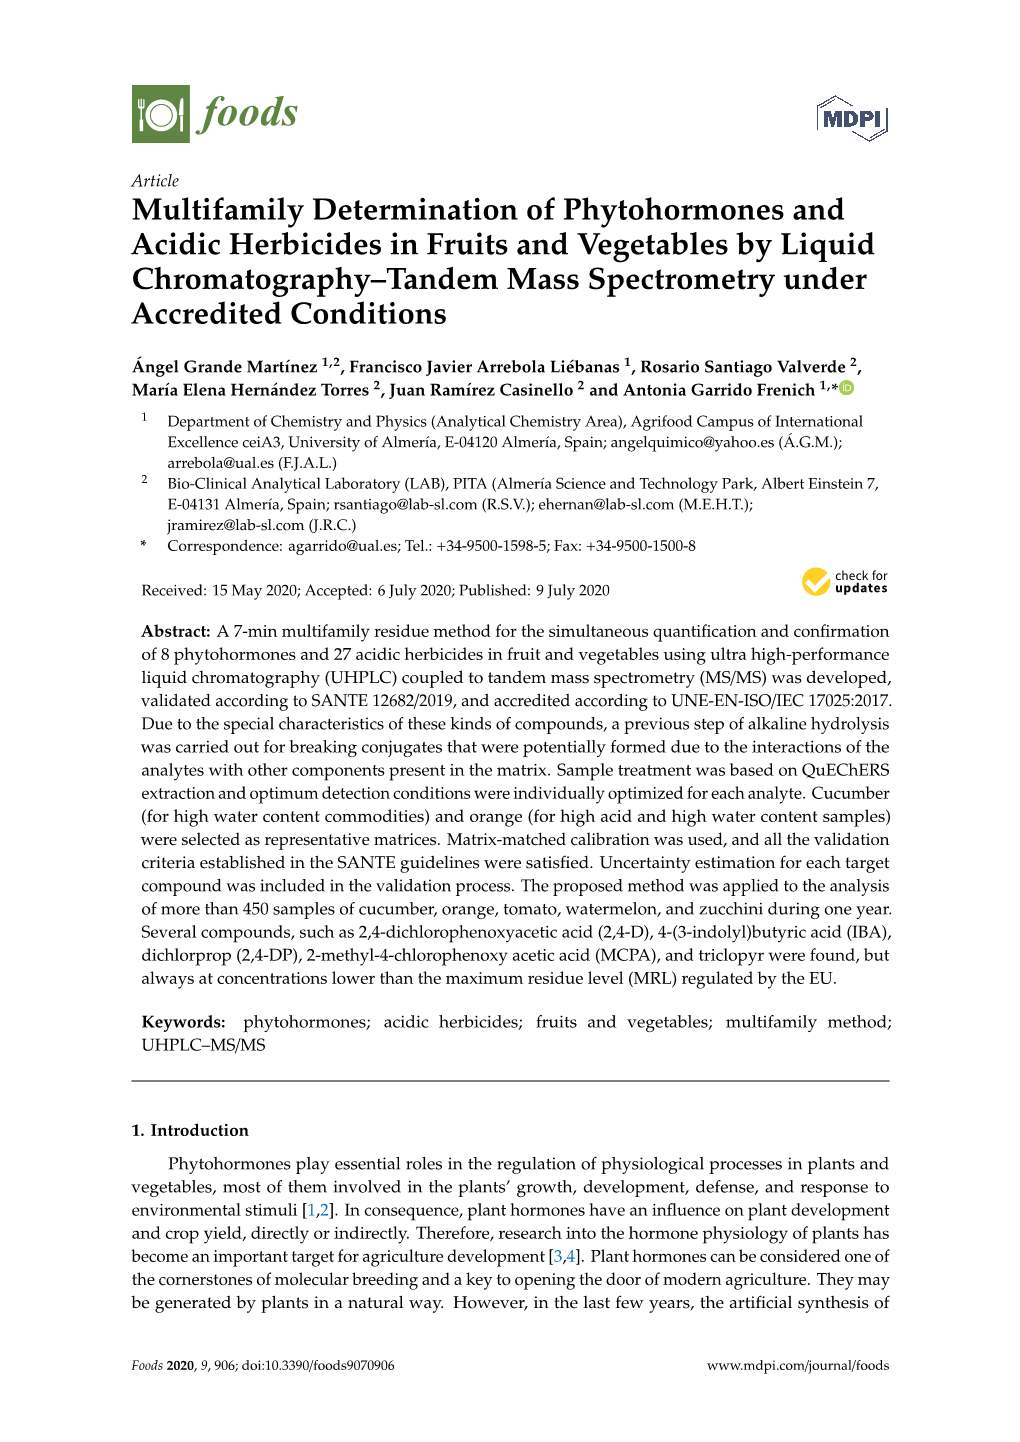 Multifamily Determination of Phytohormones and Acidic Herbicides in Fruits and Vegetables by Liquid Chromatography–Tandem Mass